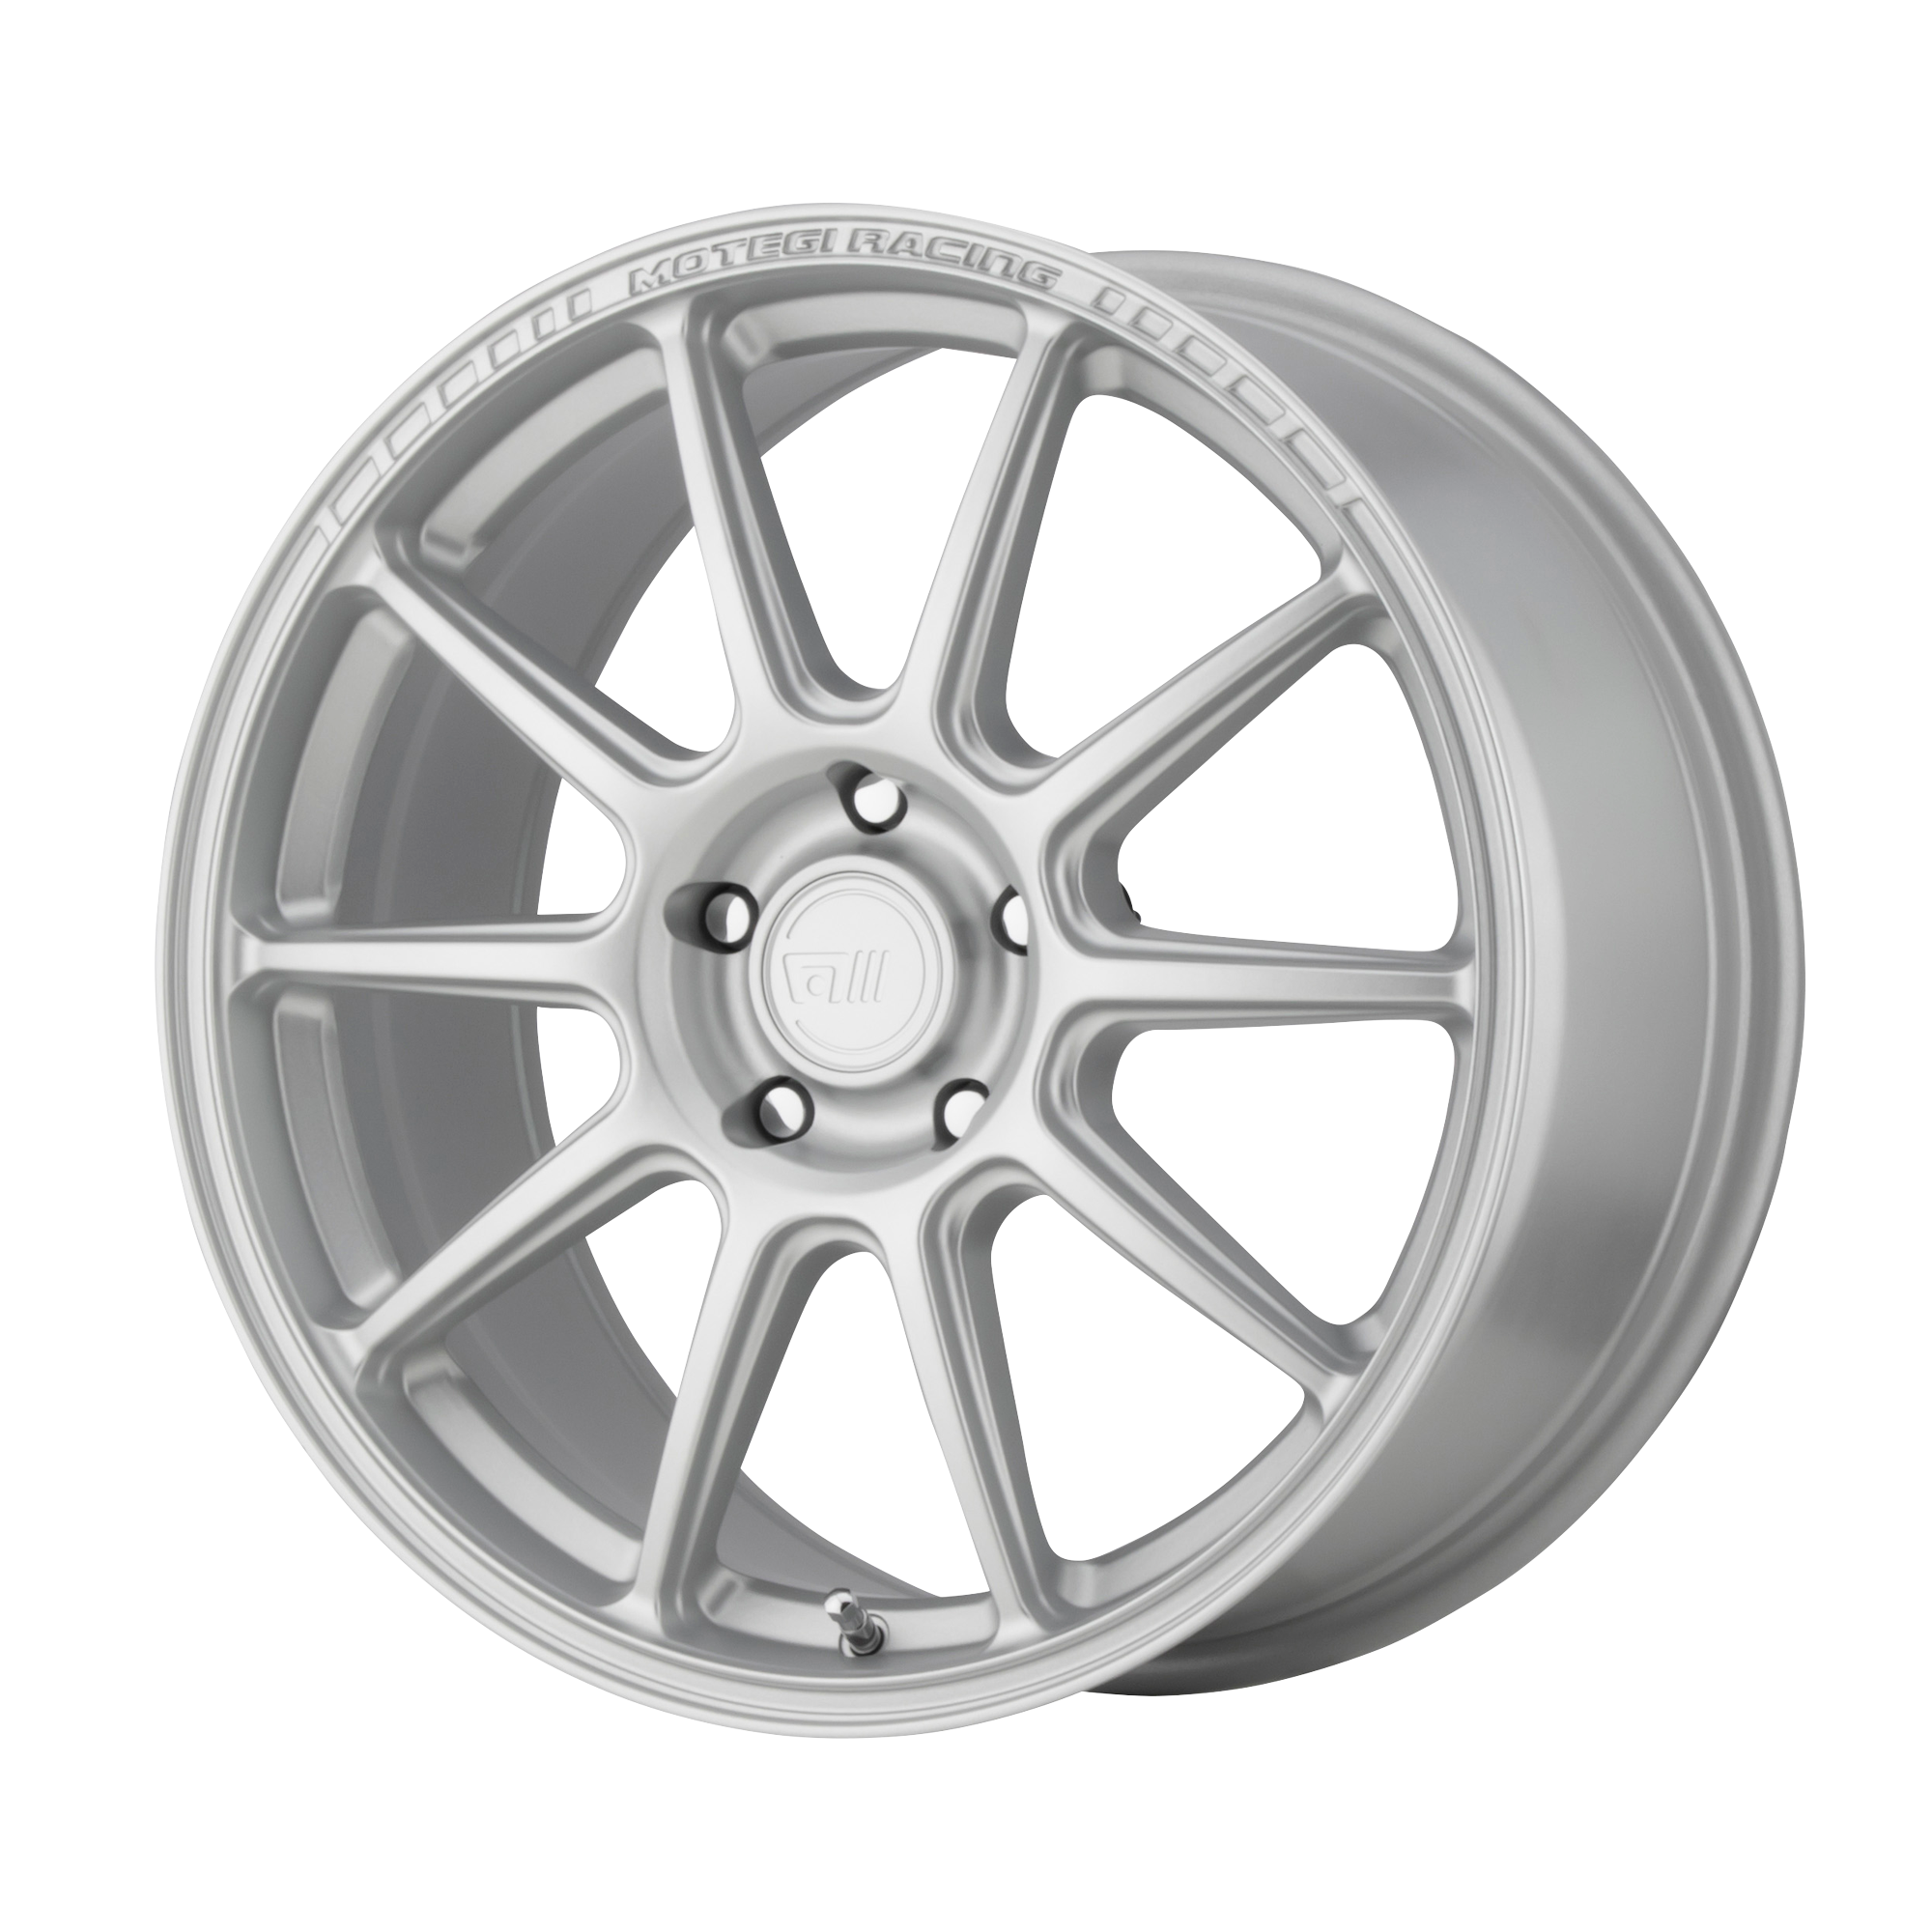 MR140 18x8.5 5x112.00 HYPER SILVER (35 mm) - Tires and Engine Performance